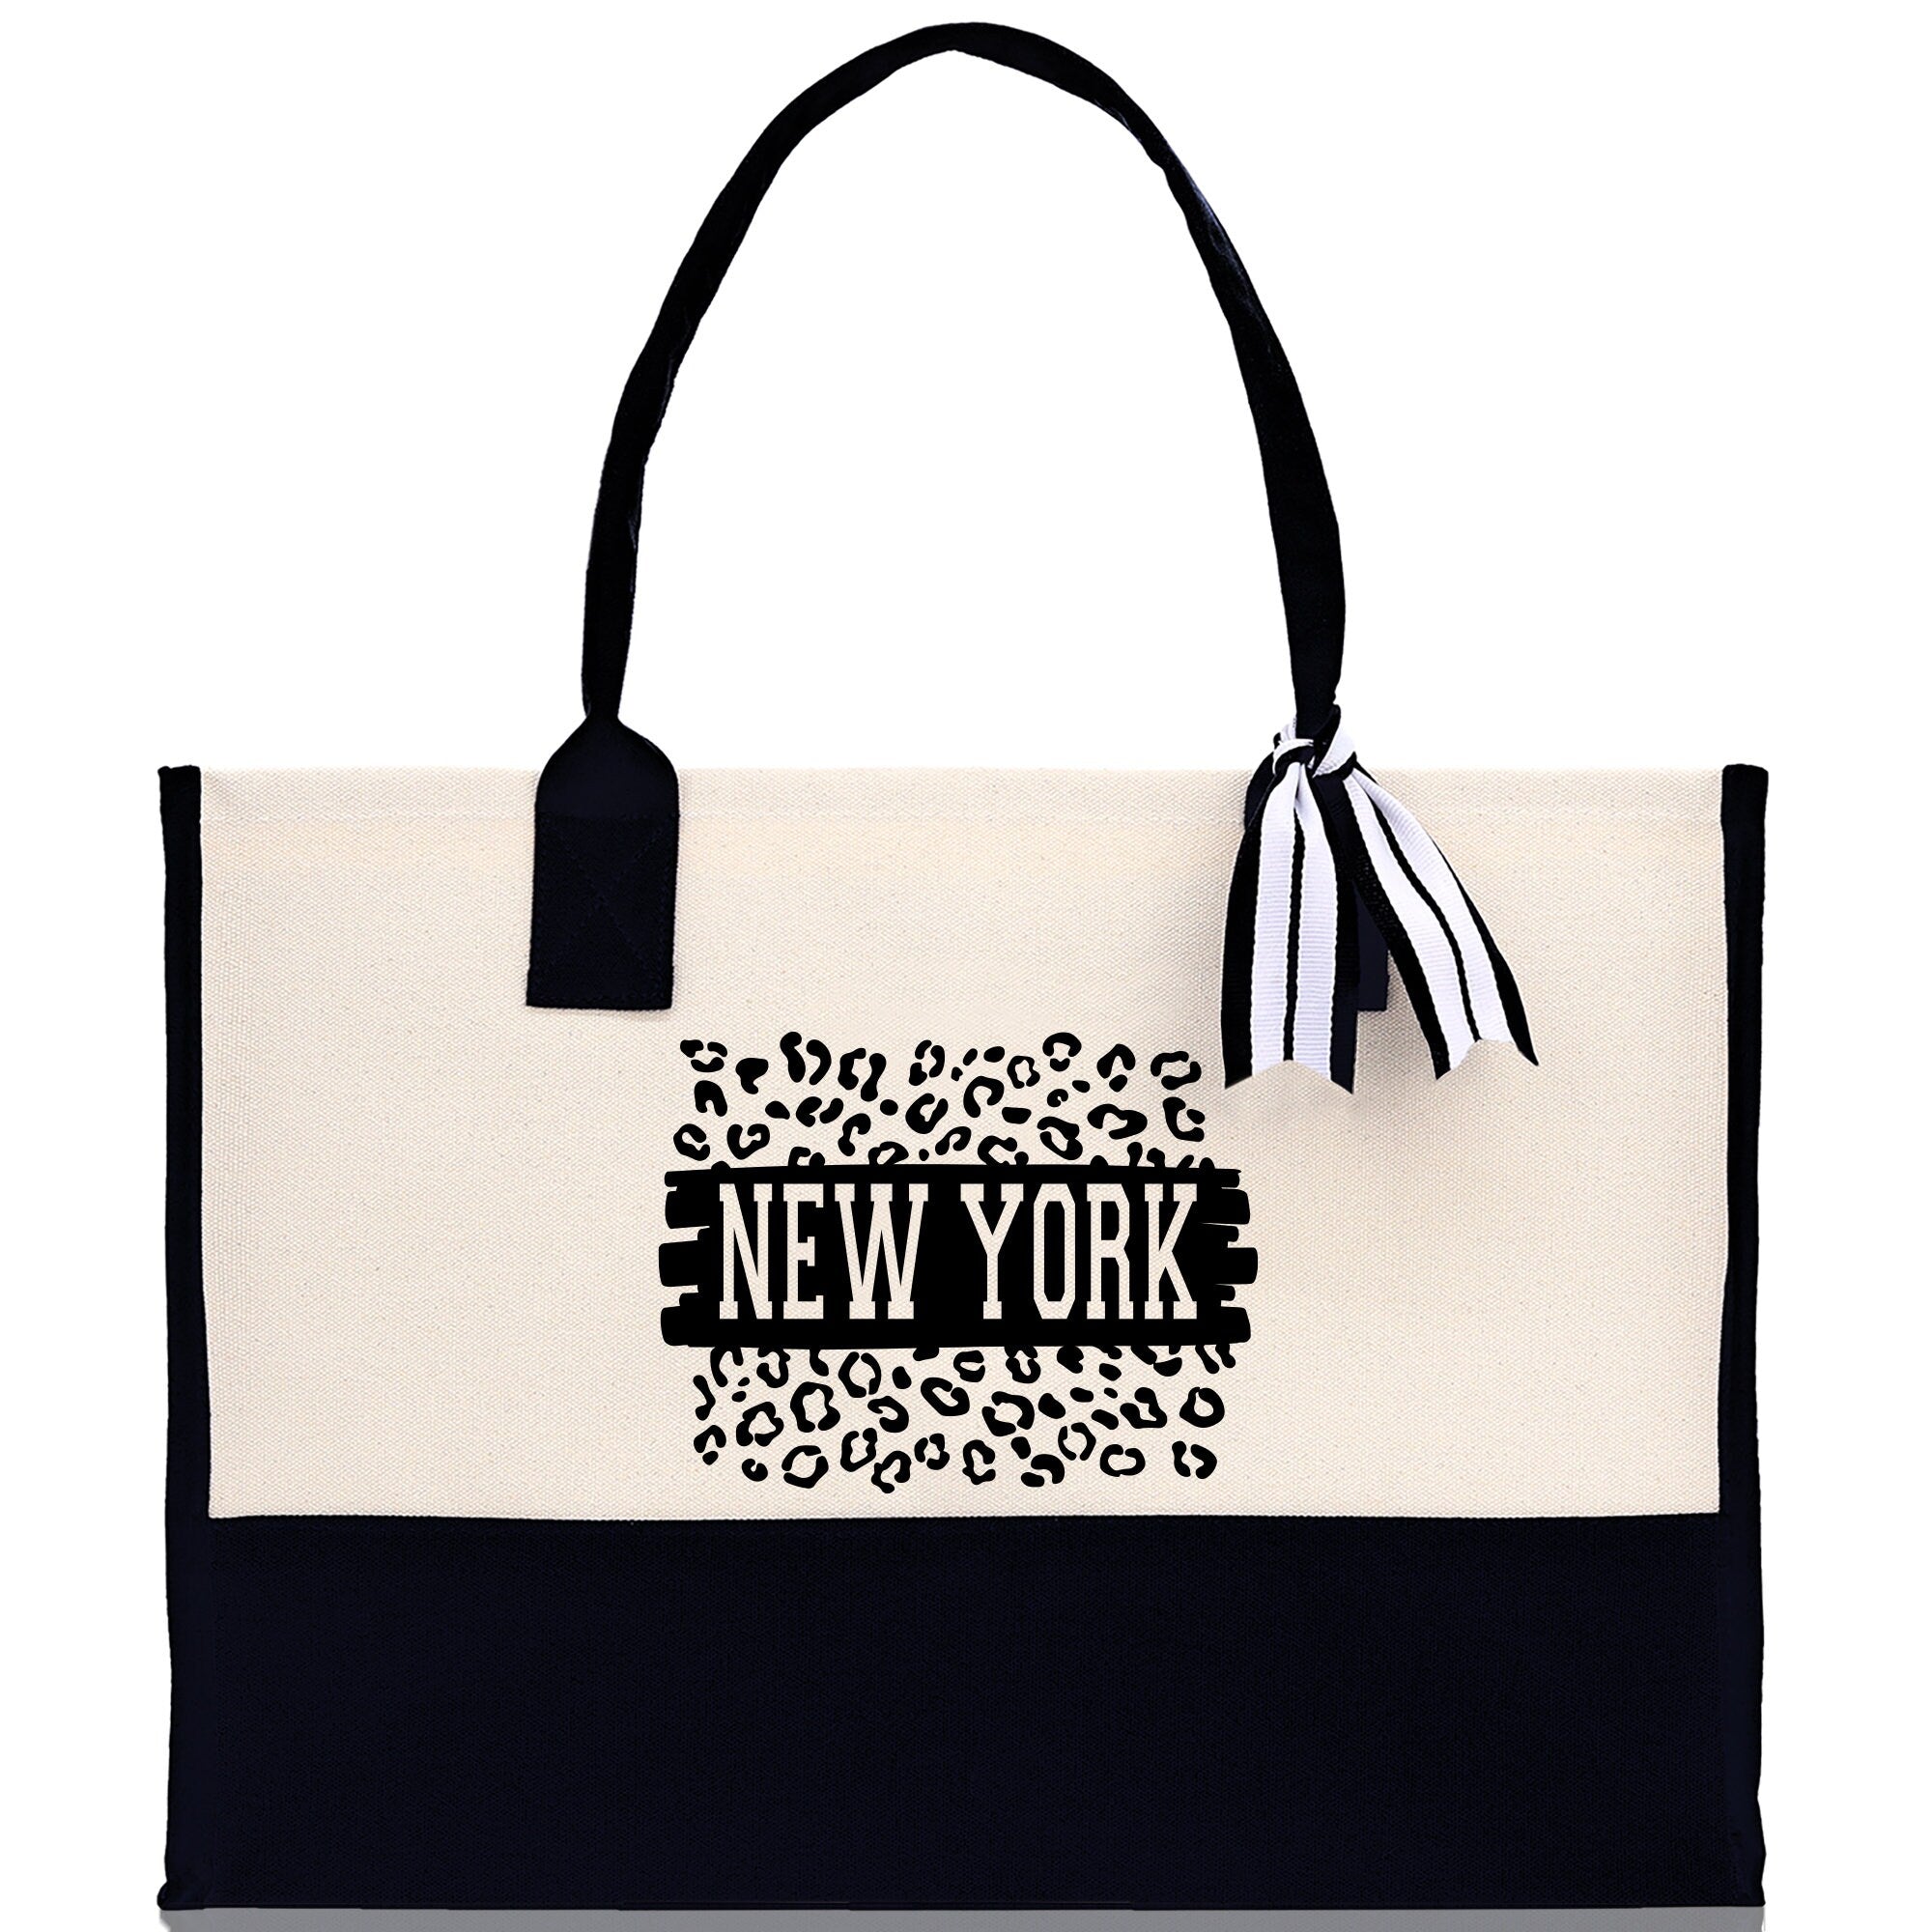 New York Cotton Canvas Tote Bag NY Travel Vacation Tote Employee and Client Gift NYC Wedding Favor Birthday Welcome Tote Bag Bridesmaid Gift